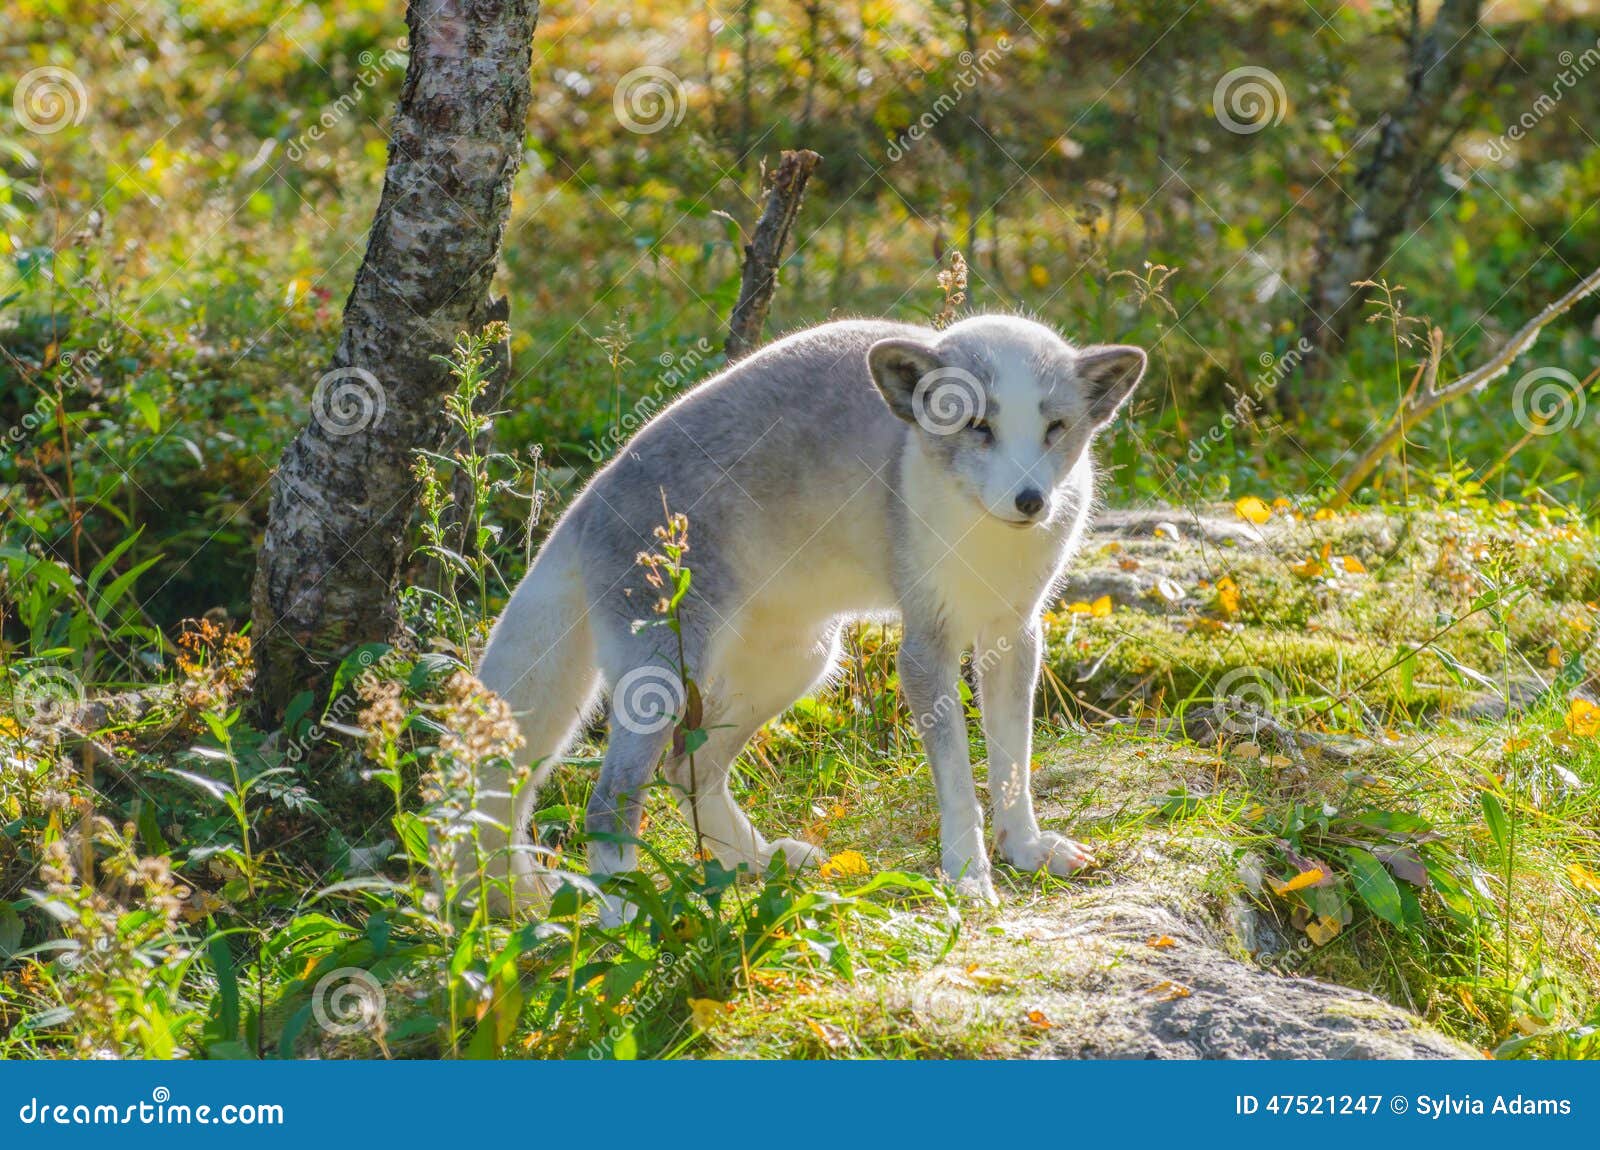 Polar fox standing on a rock, photographed in backlight